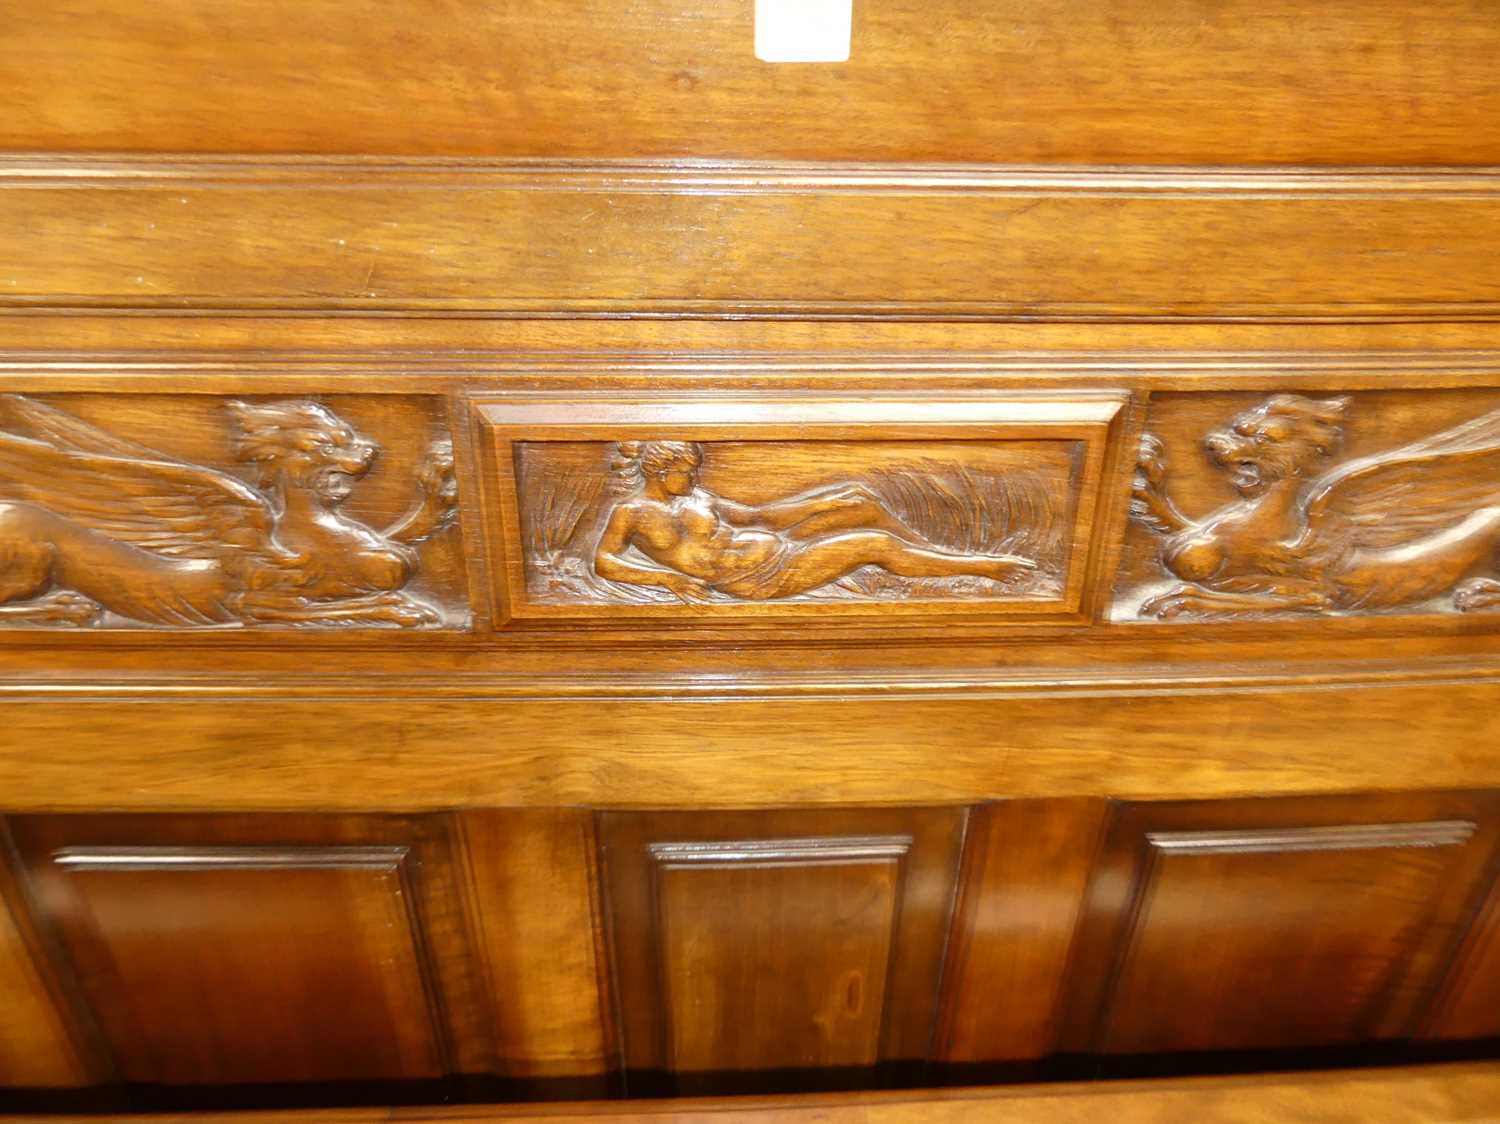 An early 20th century French relief carved walnut king size bedstead, the headboard with - Image 3 of 3